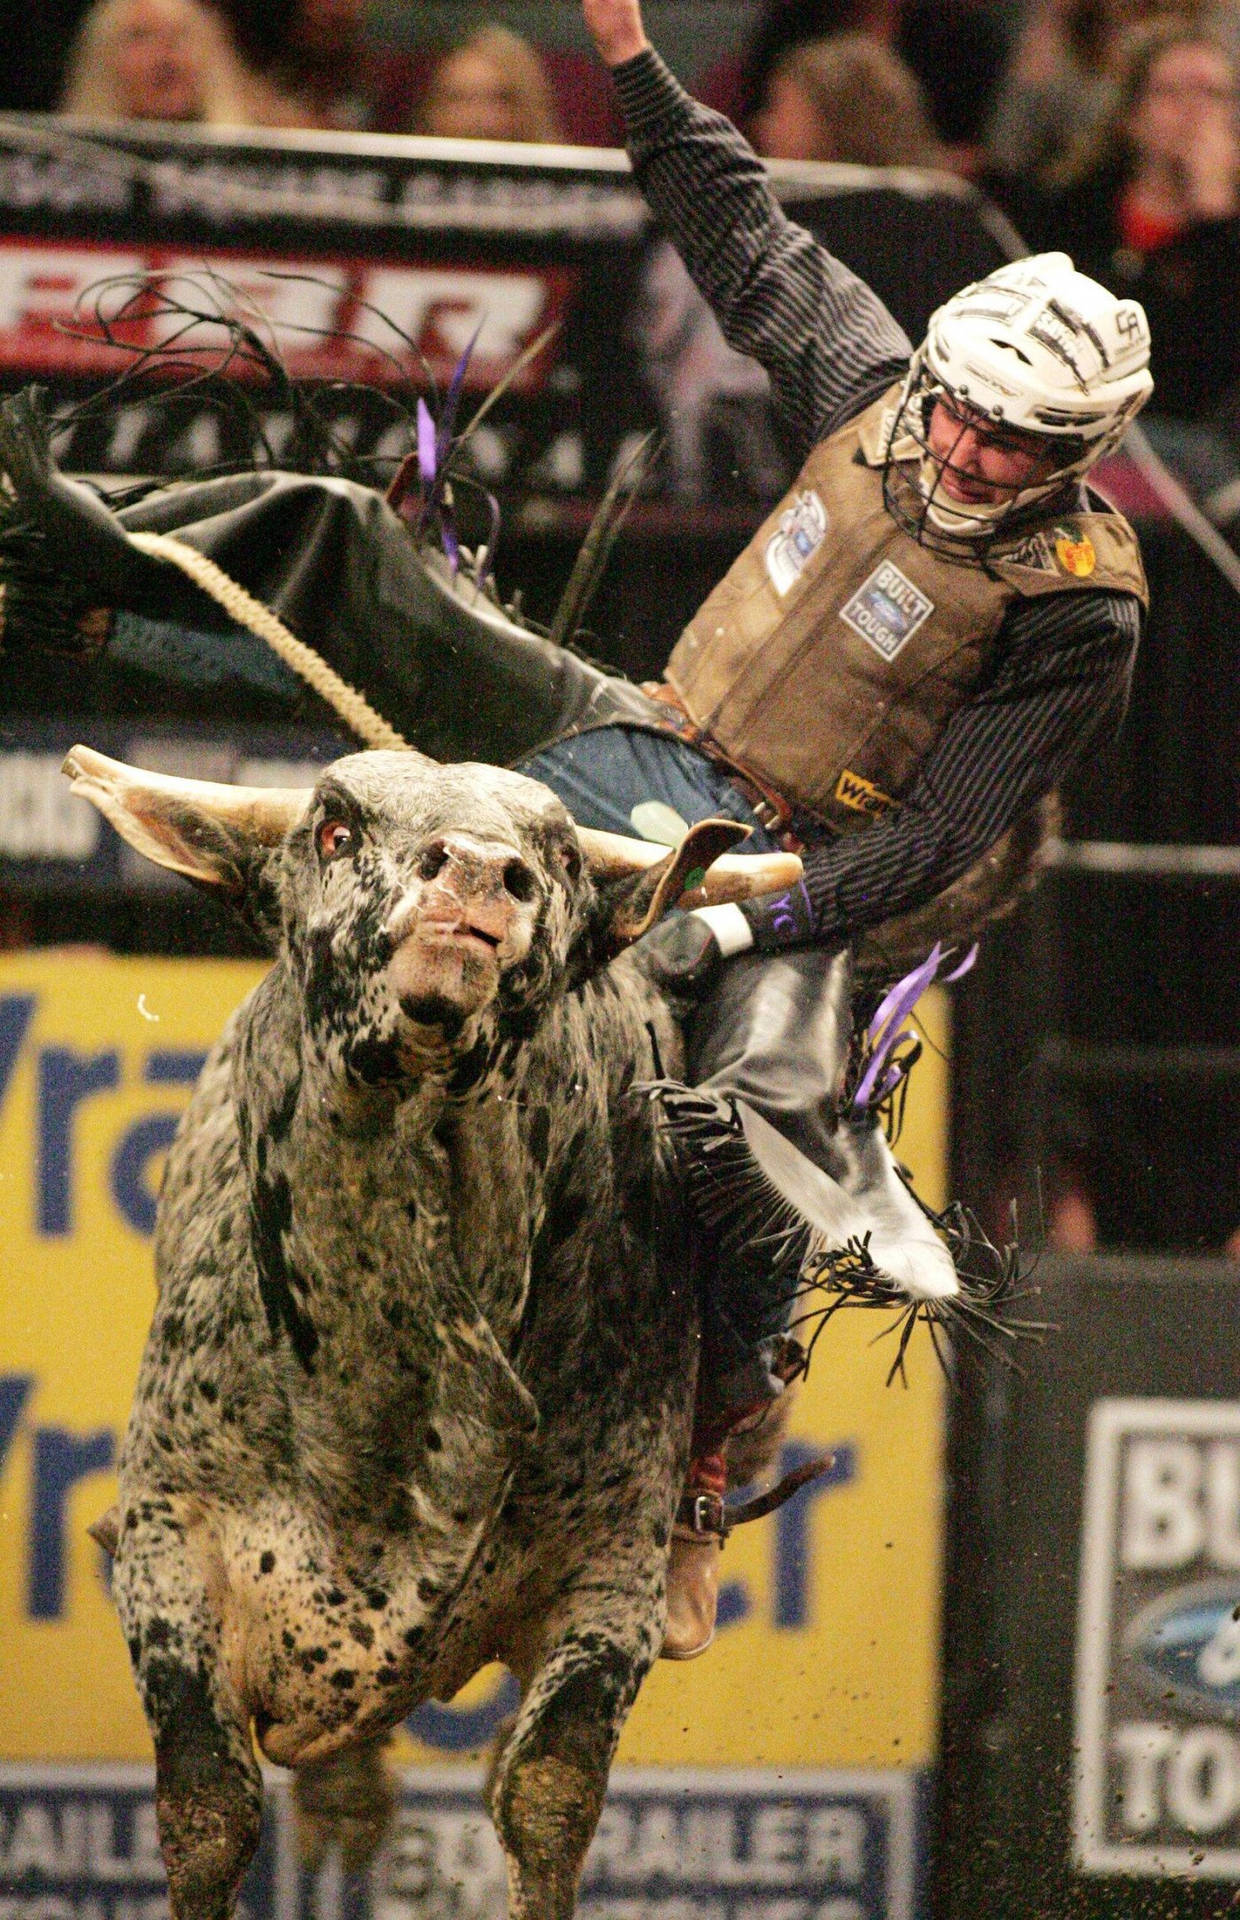 An Intense Bull Riding Competition Background